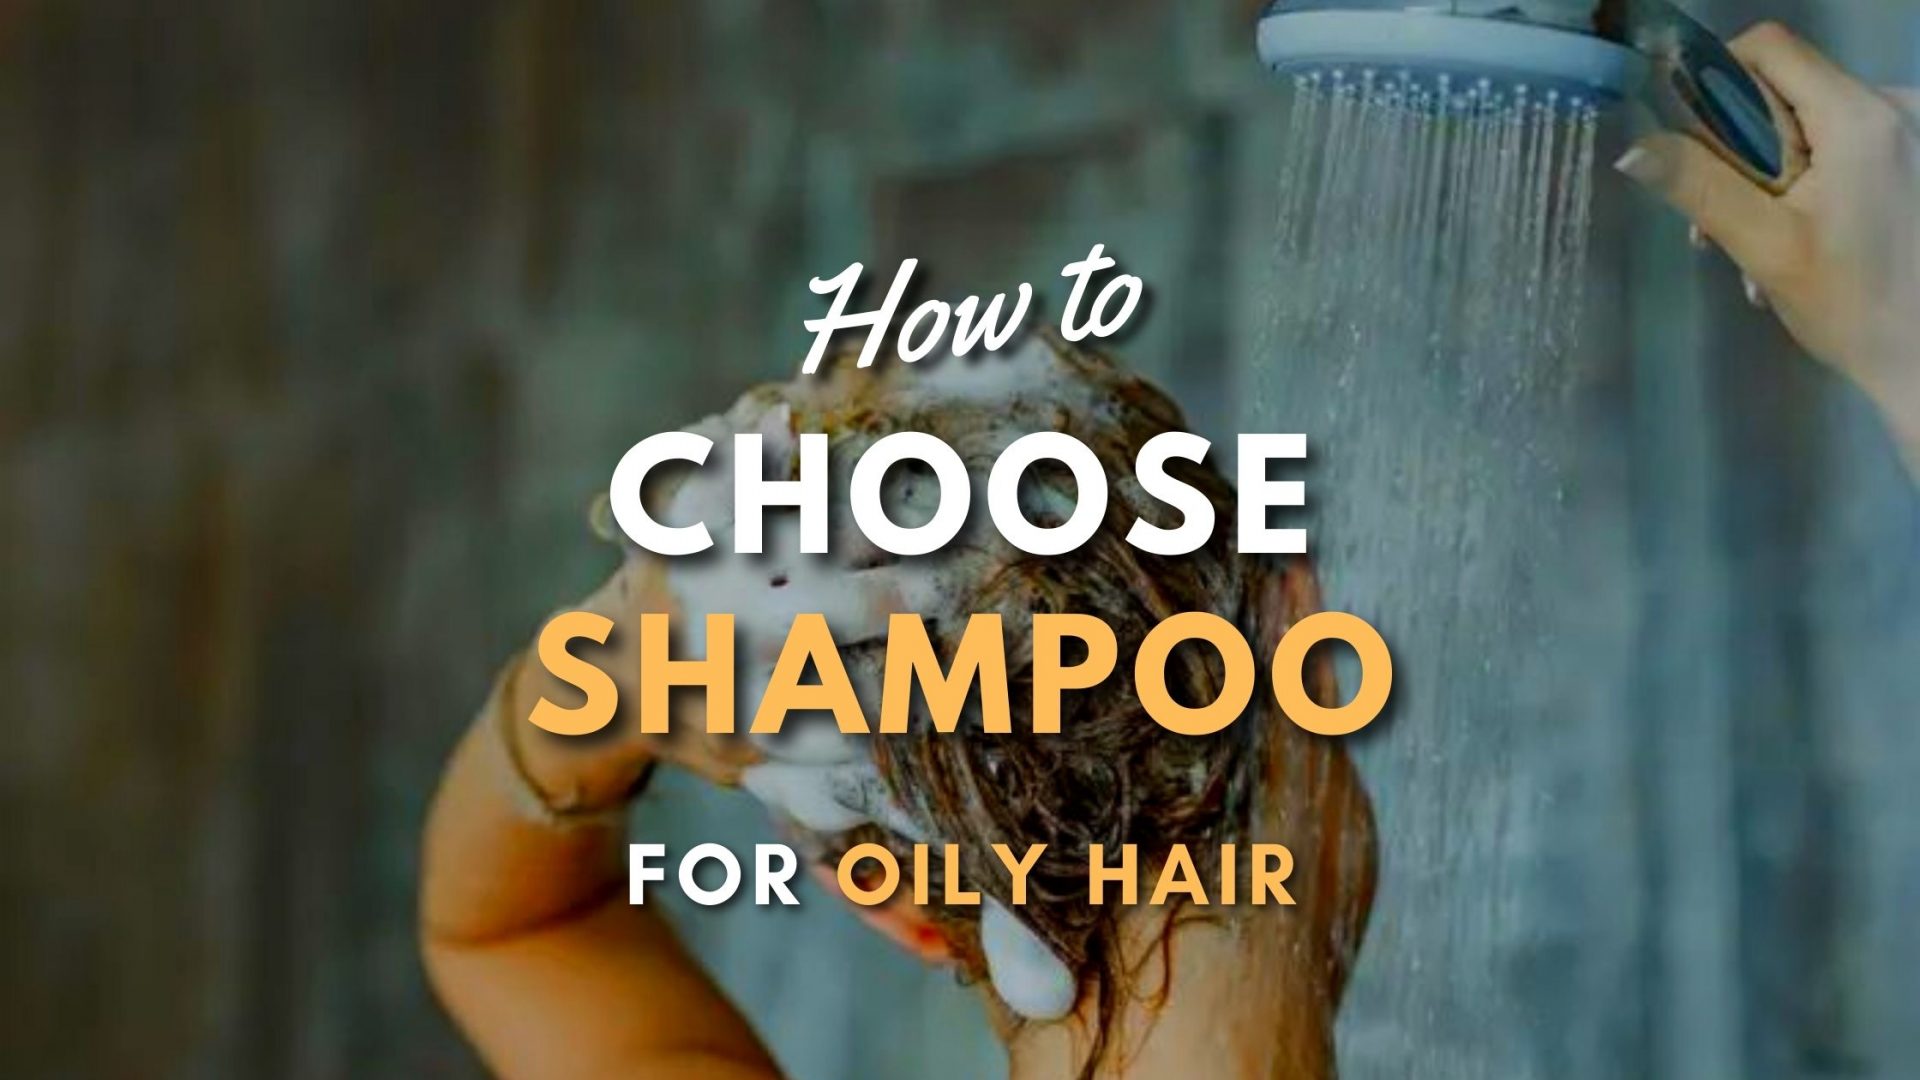 Shampoo for Oily Hair: Understand How to Choose